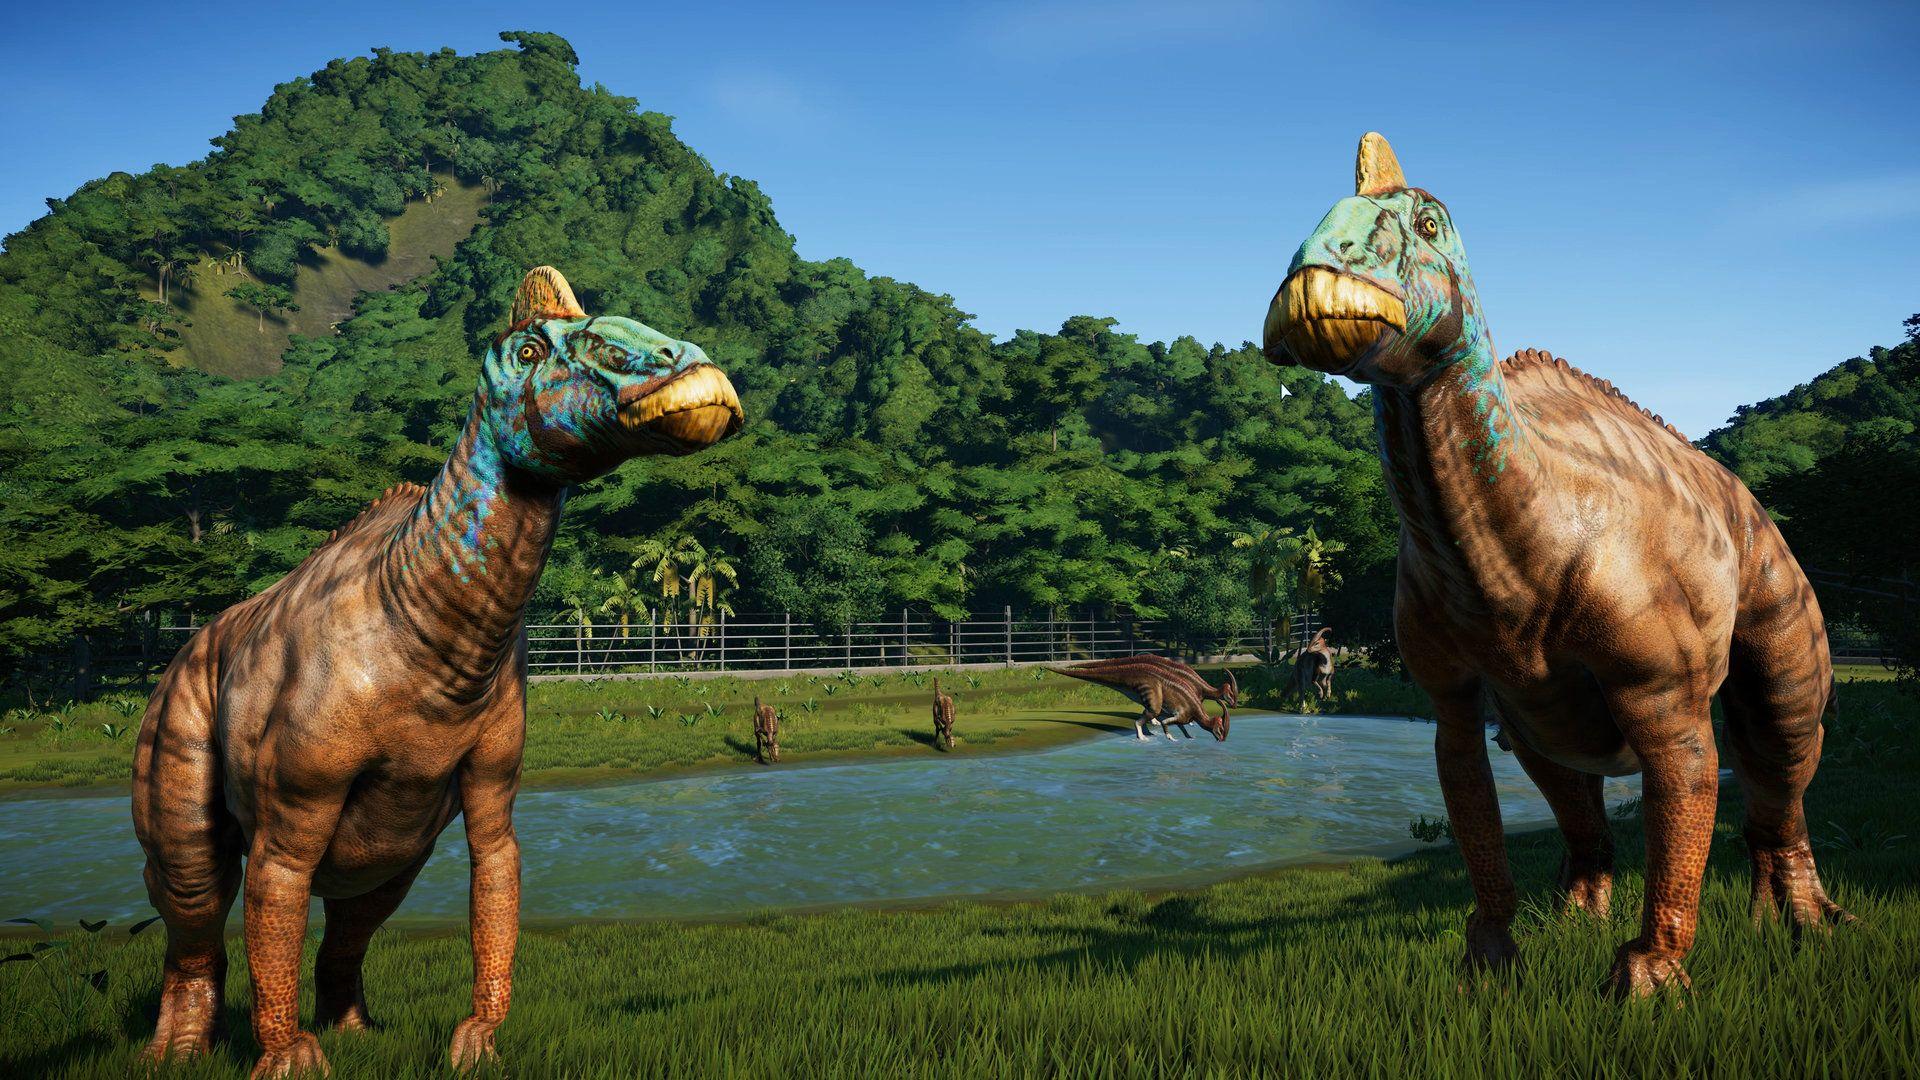 Jurassic World Evolution Not Loading On PS4 XBox One. Try This